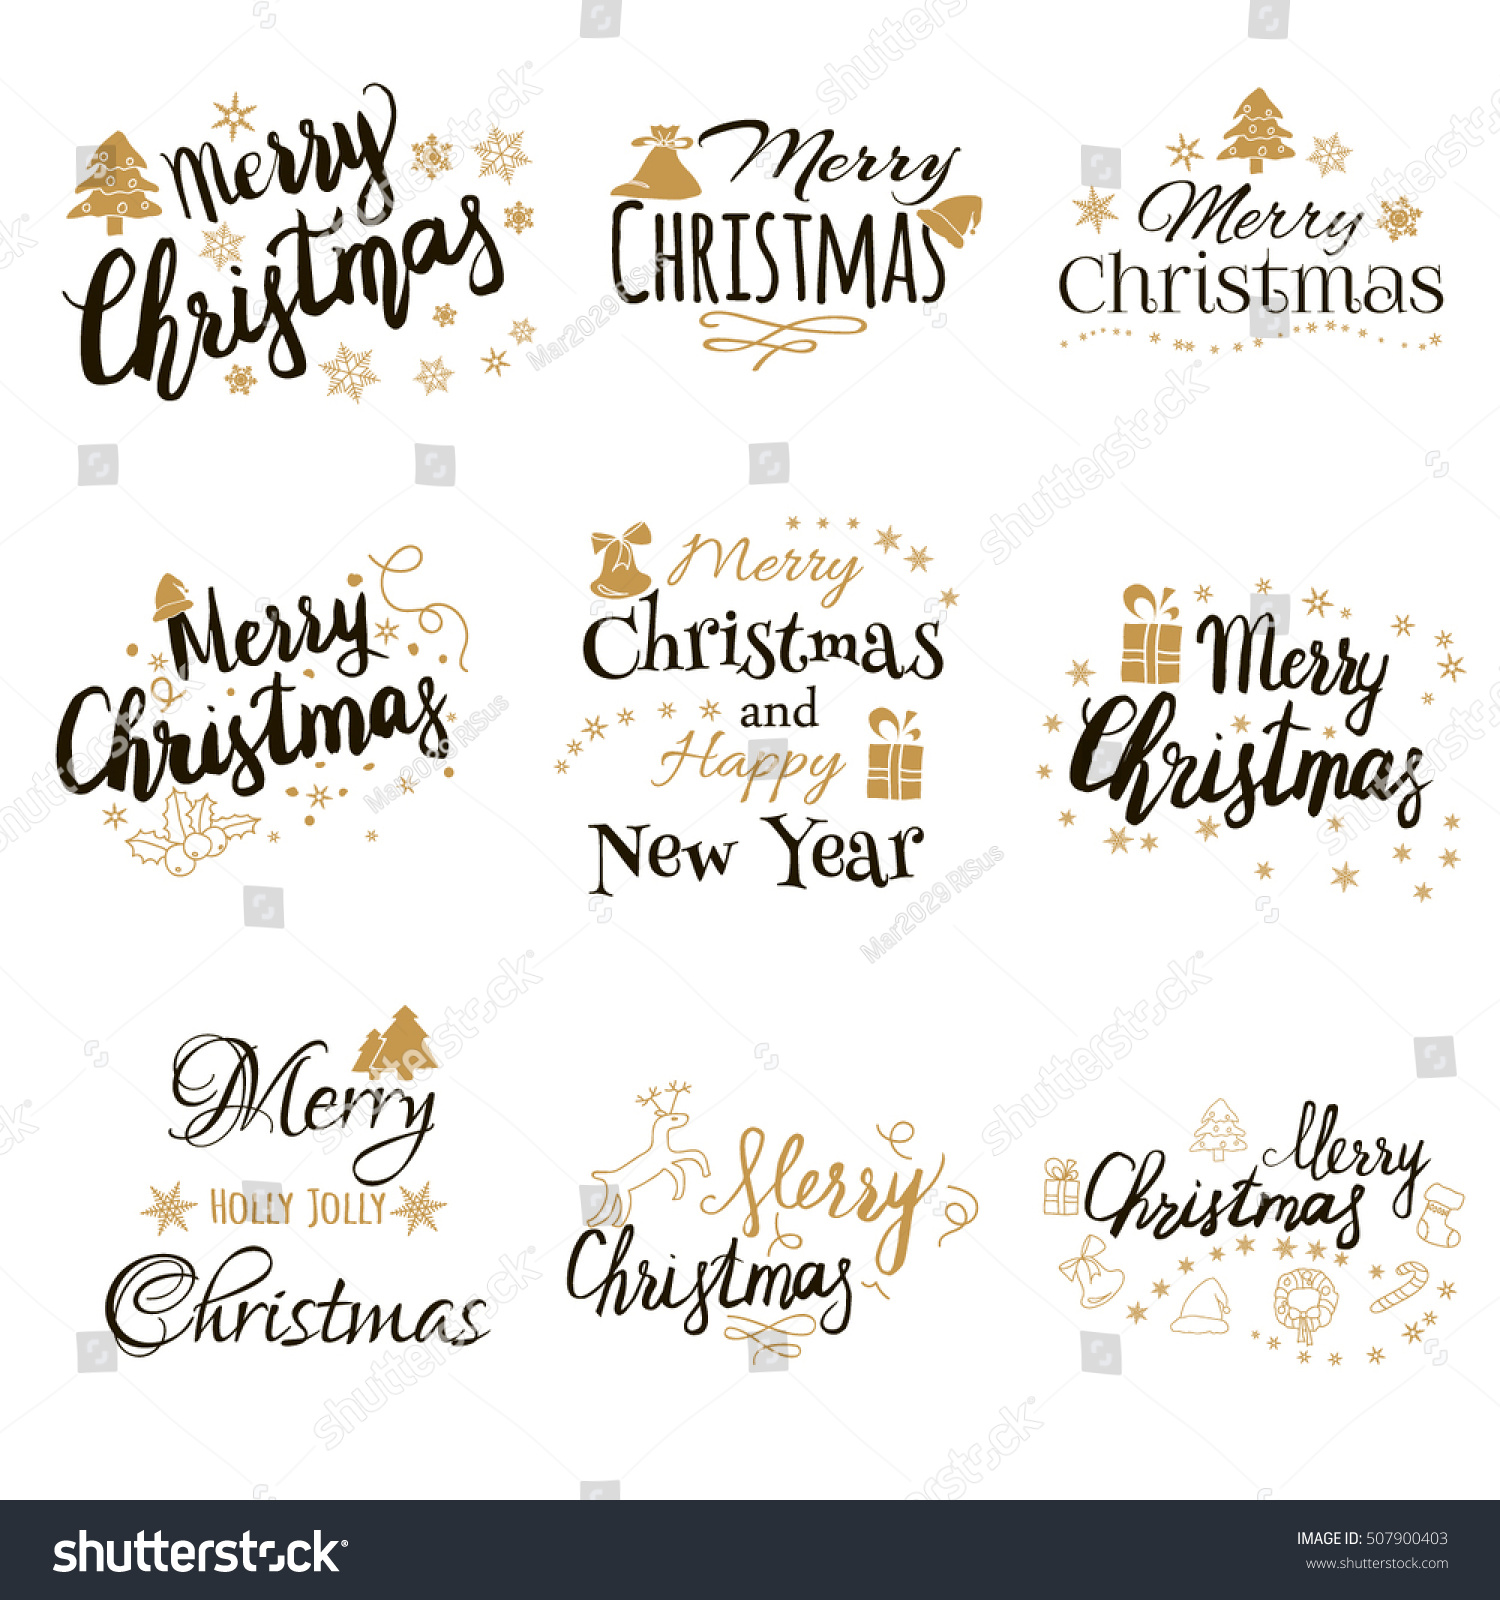 merry Christmas and happy new year set vector logo emblems for flyers